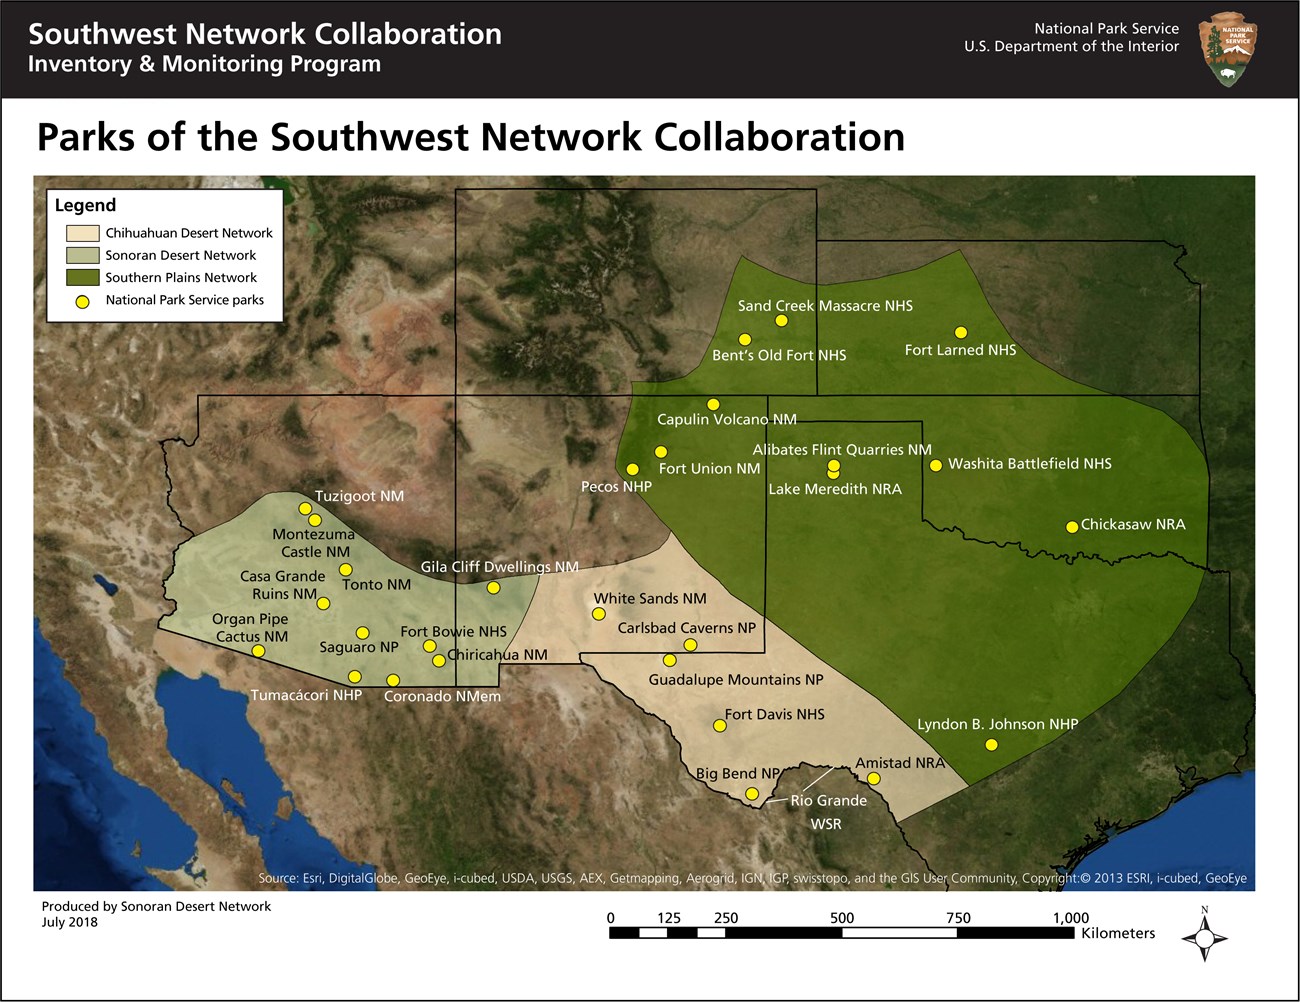 Map of Southwest Network Collaboration parks